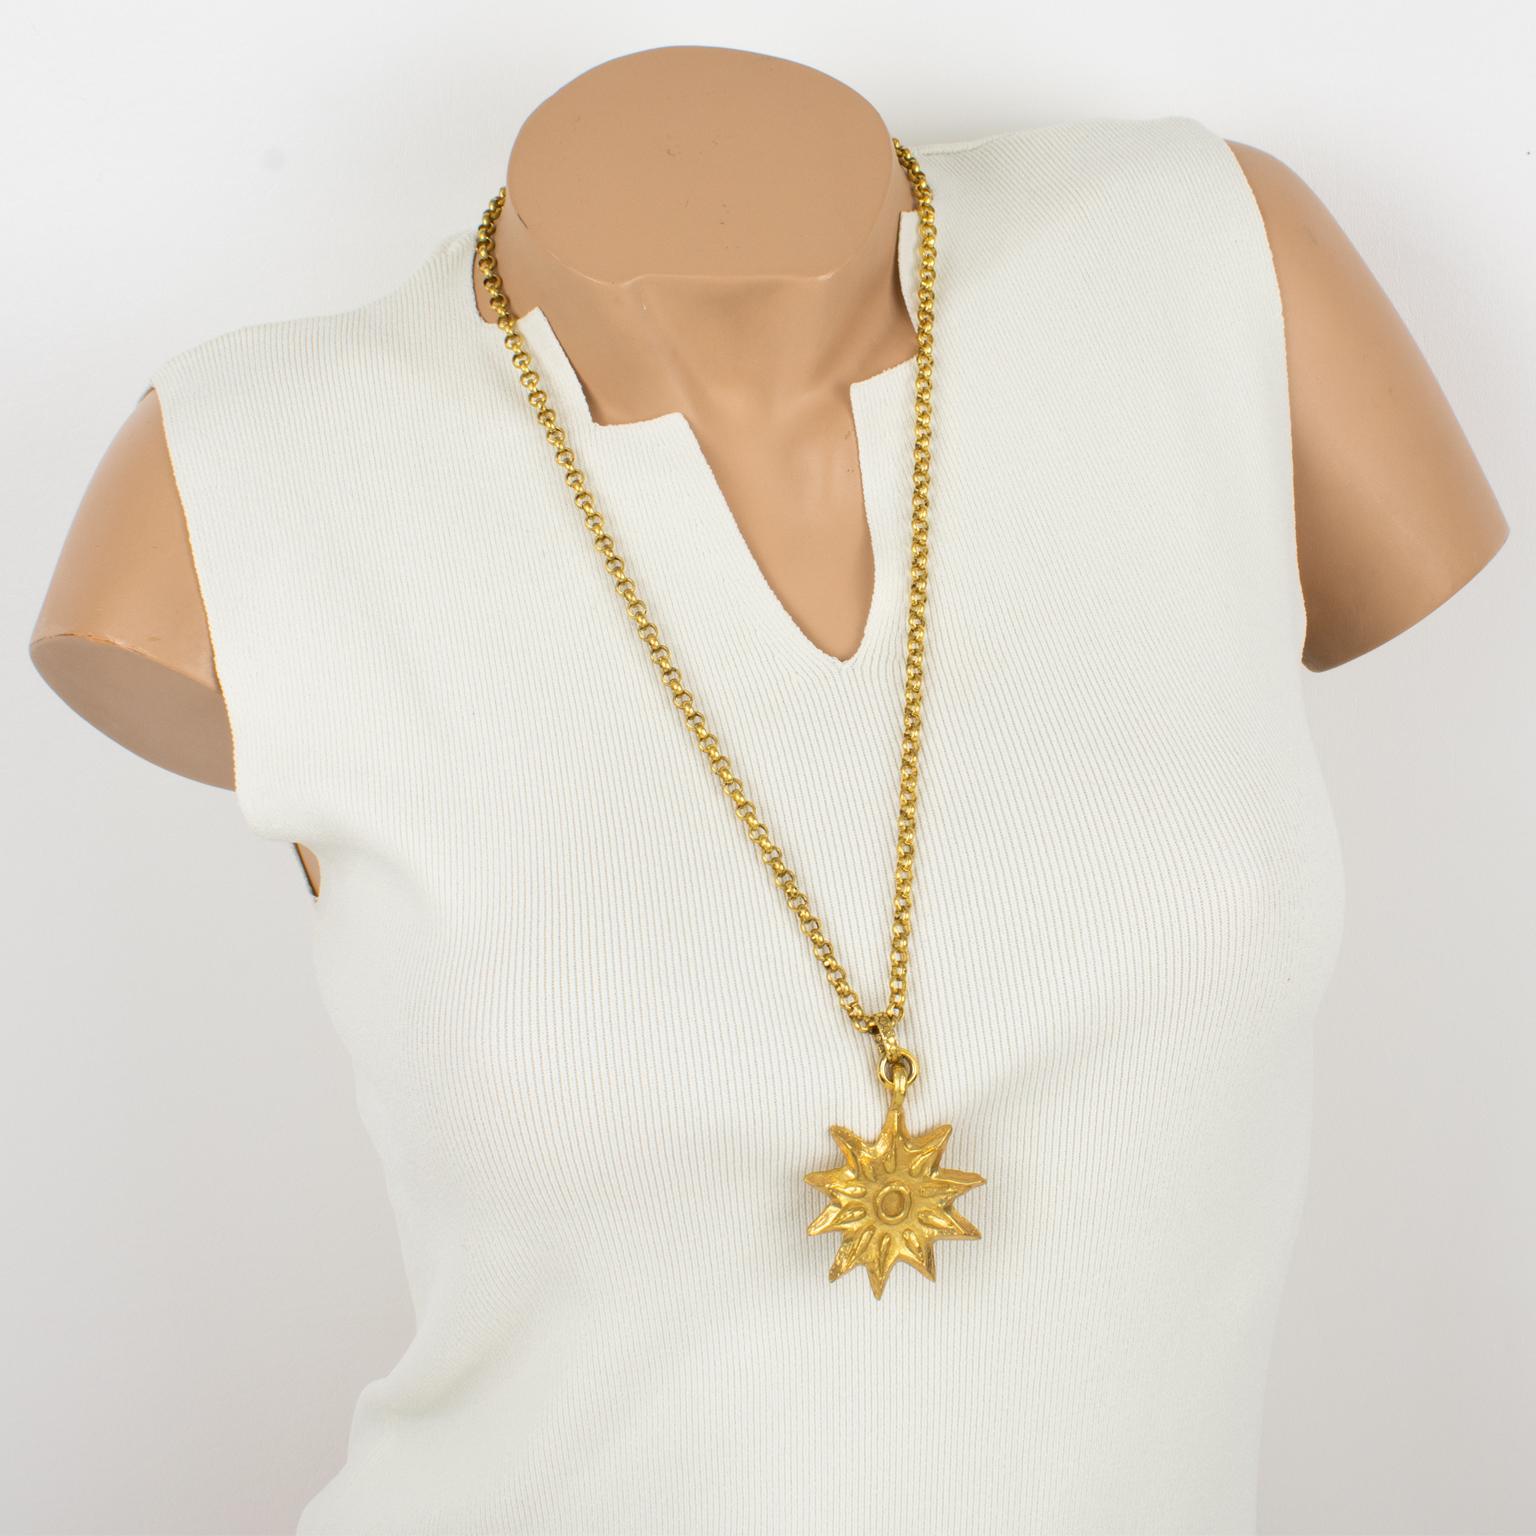 This lovely Edouard Rambaud Paris pendant necklace features a stylized dimensional sun design with gilded metal, all textured, in a semi-mat finish aspect. The long gilt metal chain has a spring-ring closing clasp. The pendant is marked on the